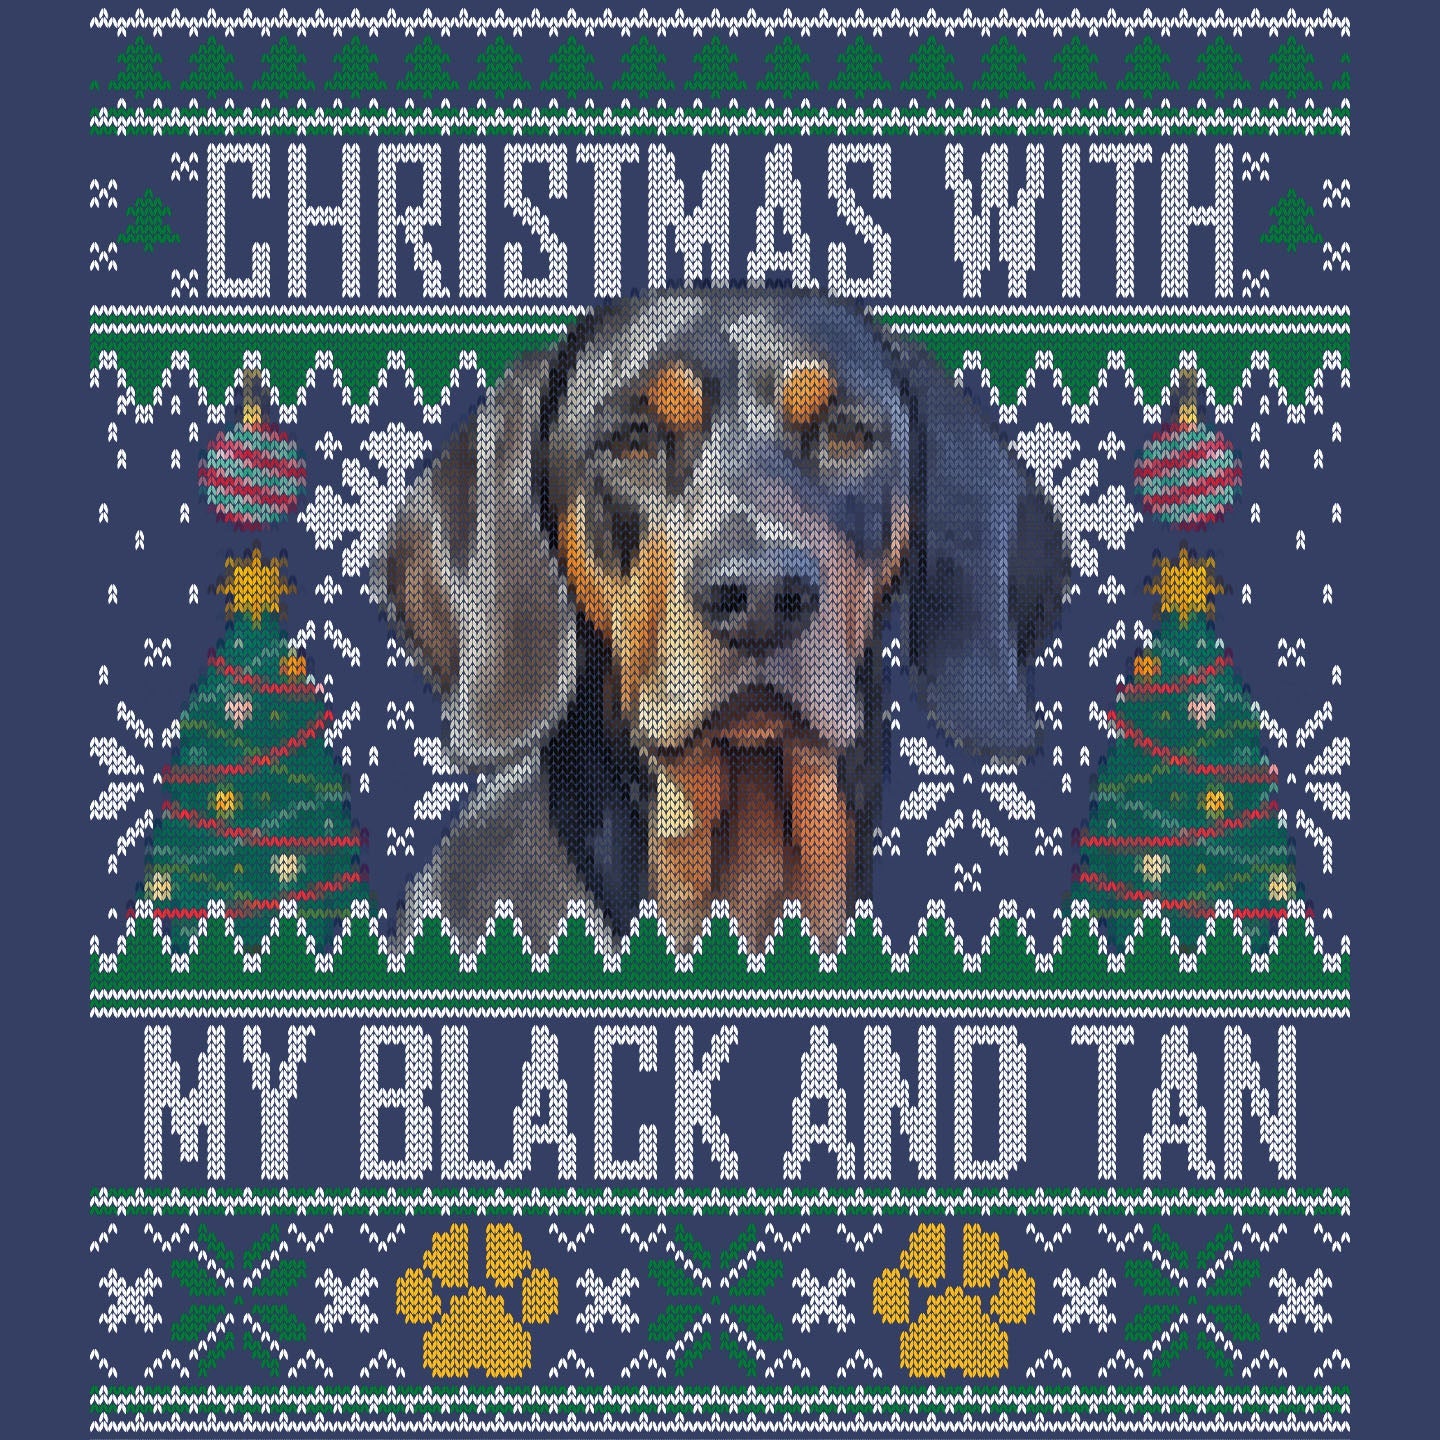 Ugly Sweater Christmas with My Black and Tan Coonhound - Adult Unisex Crewneck Sweatshirt